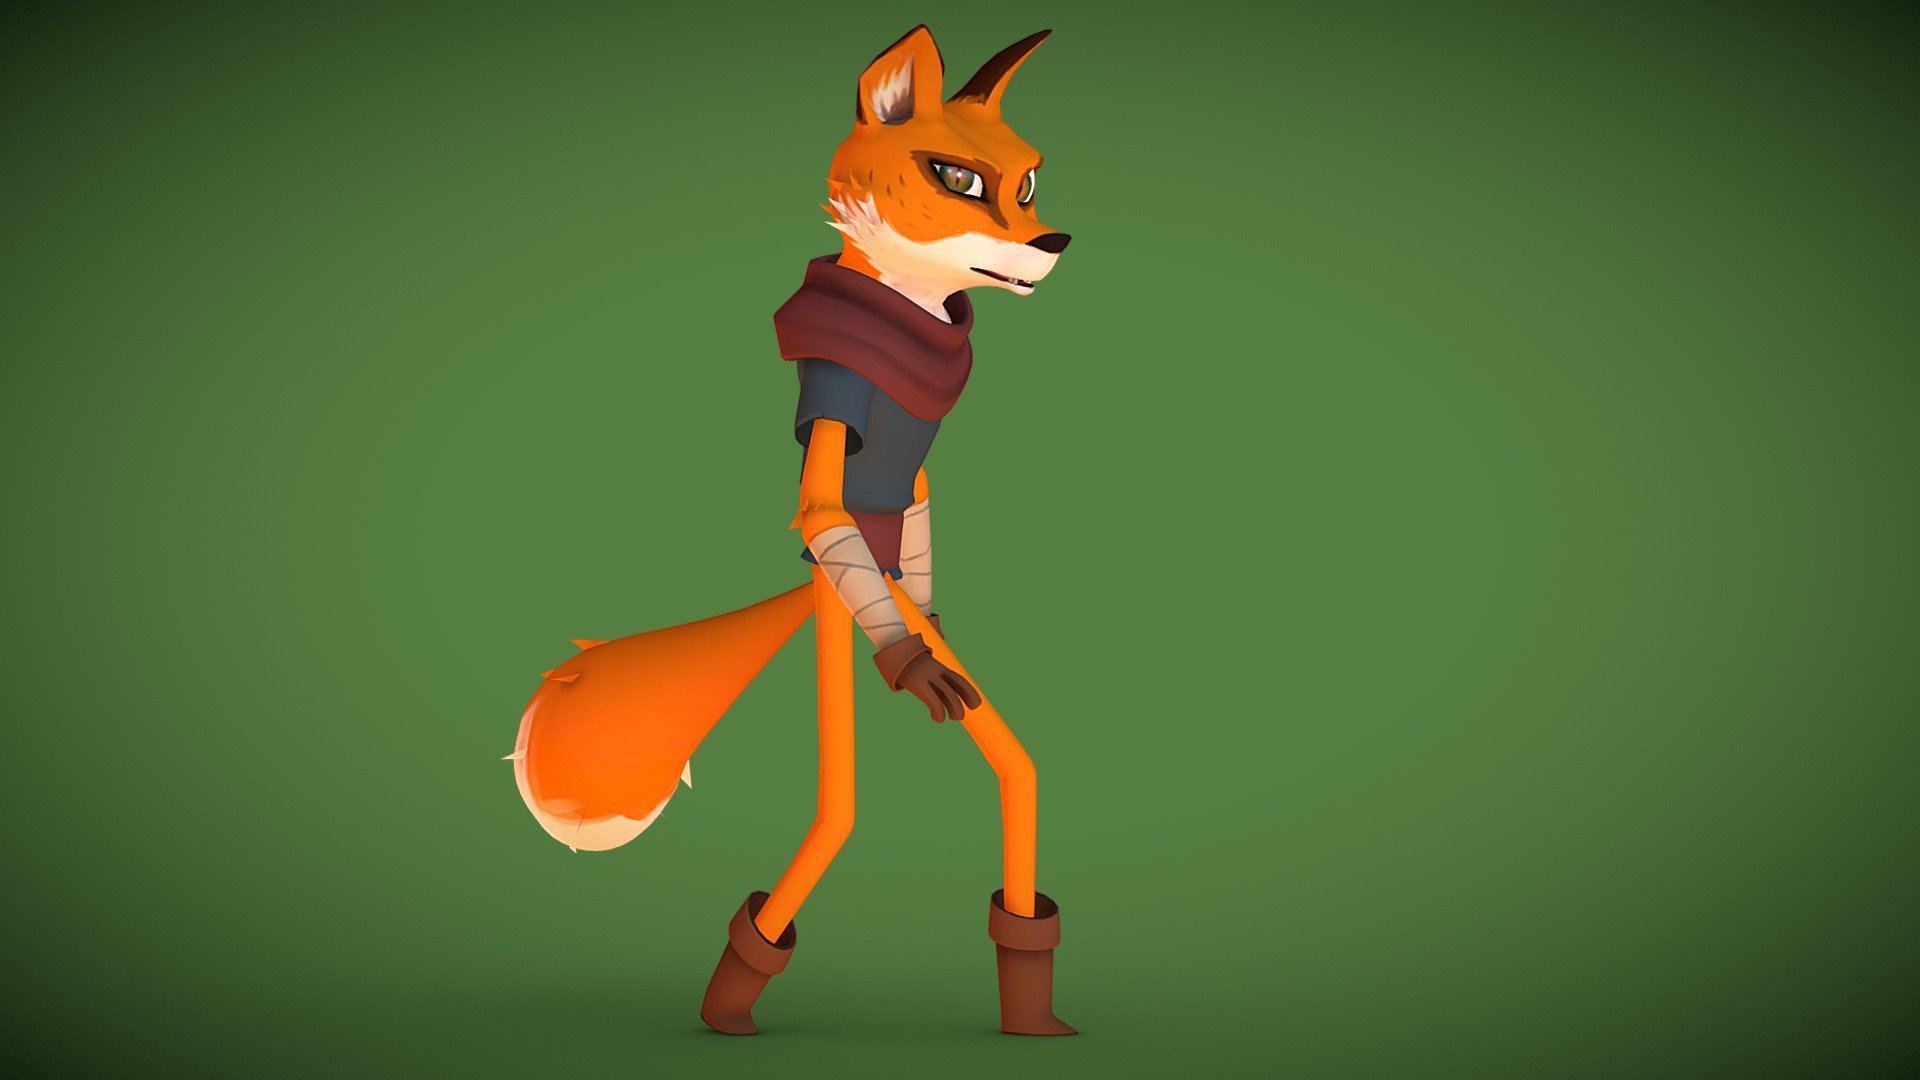 Fox model for a short movie project 3d model